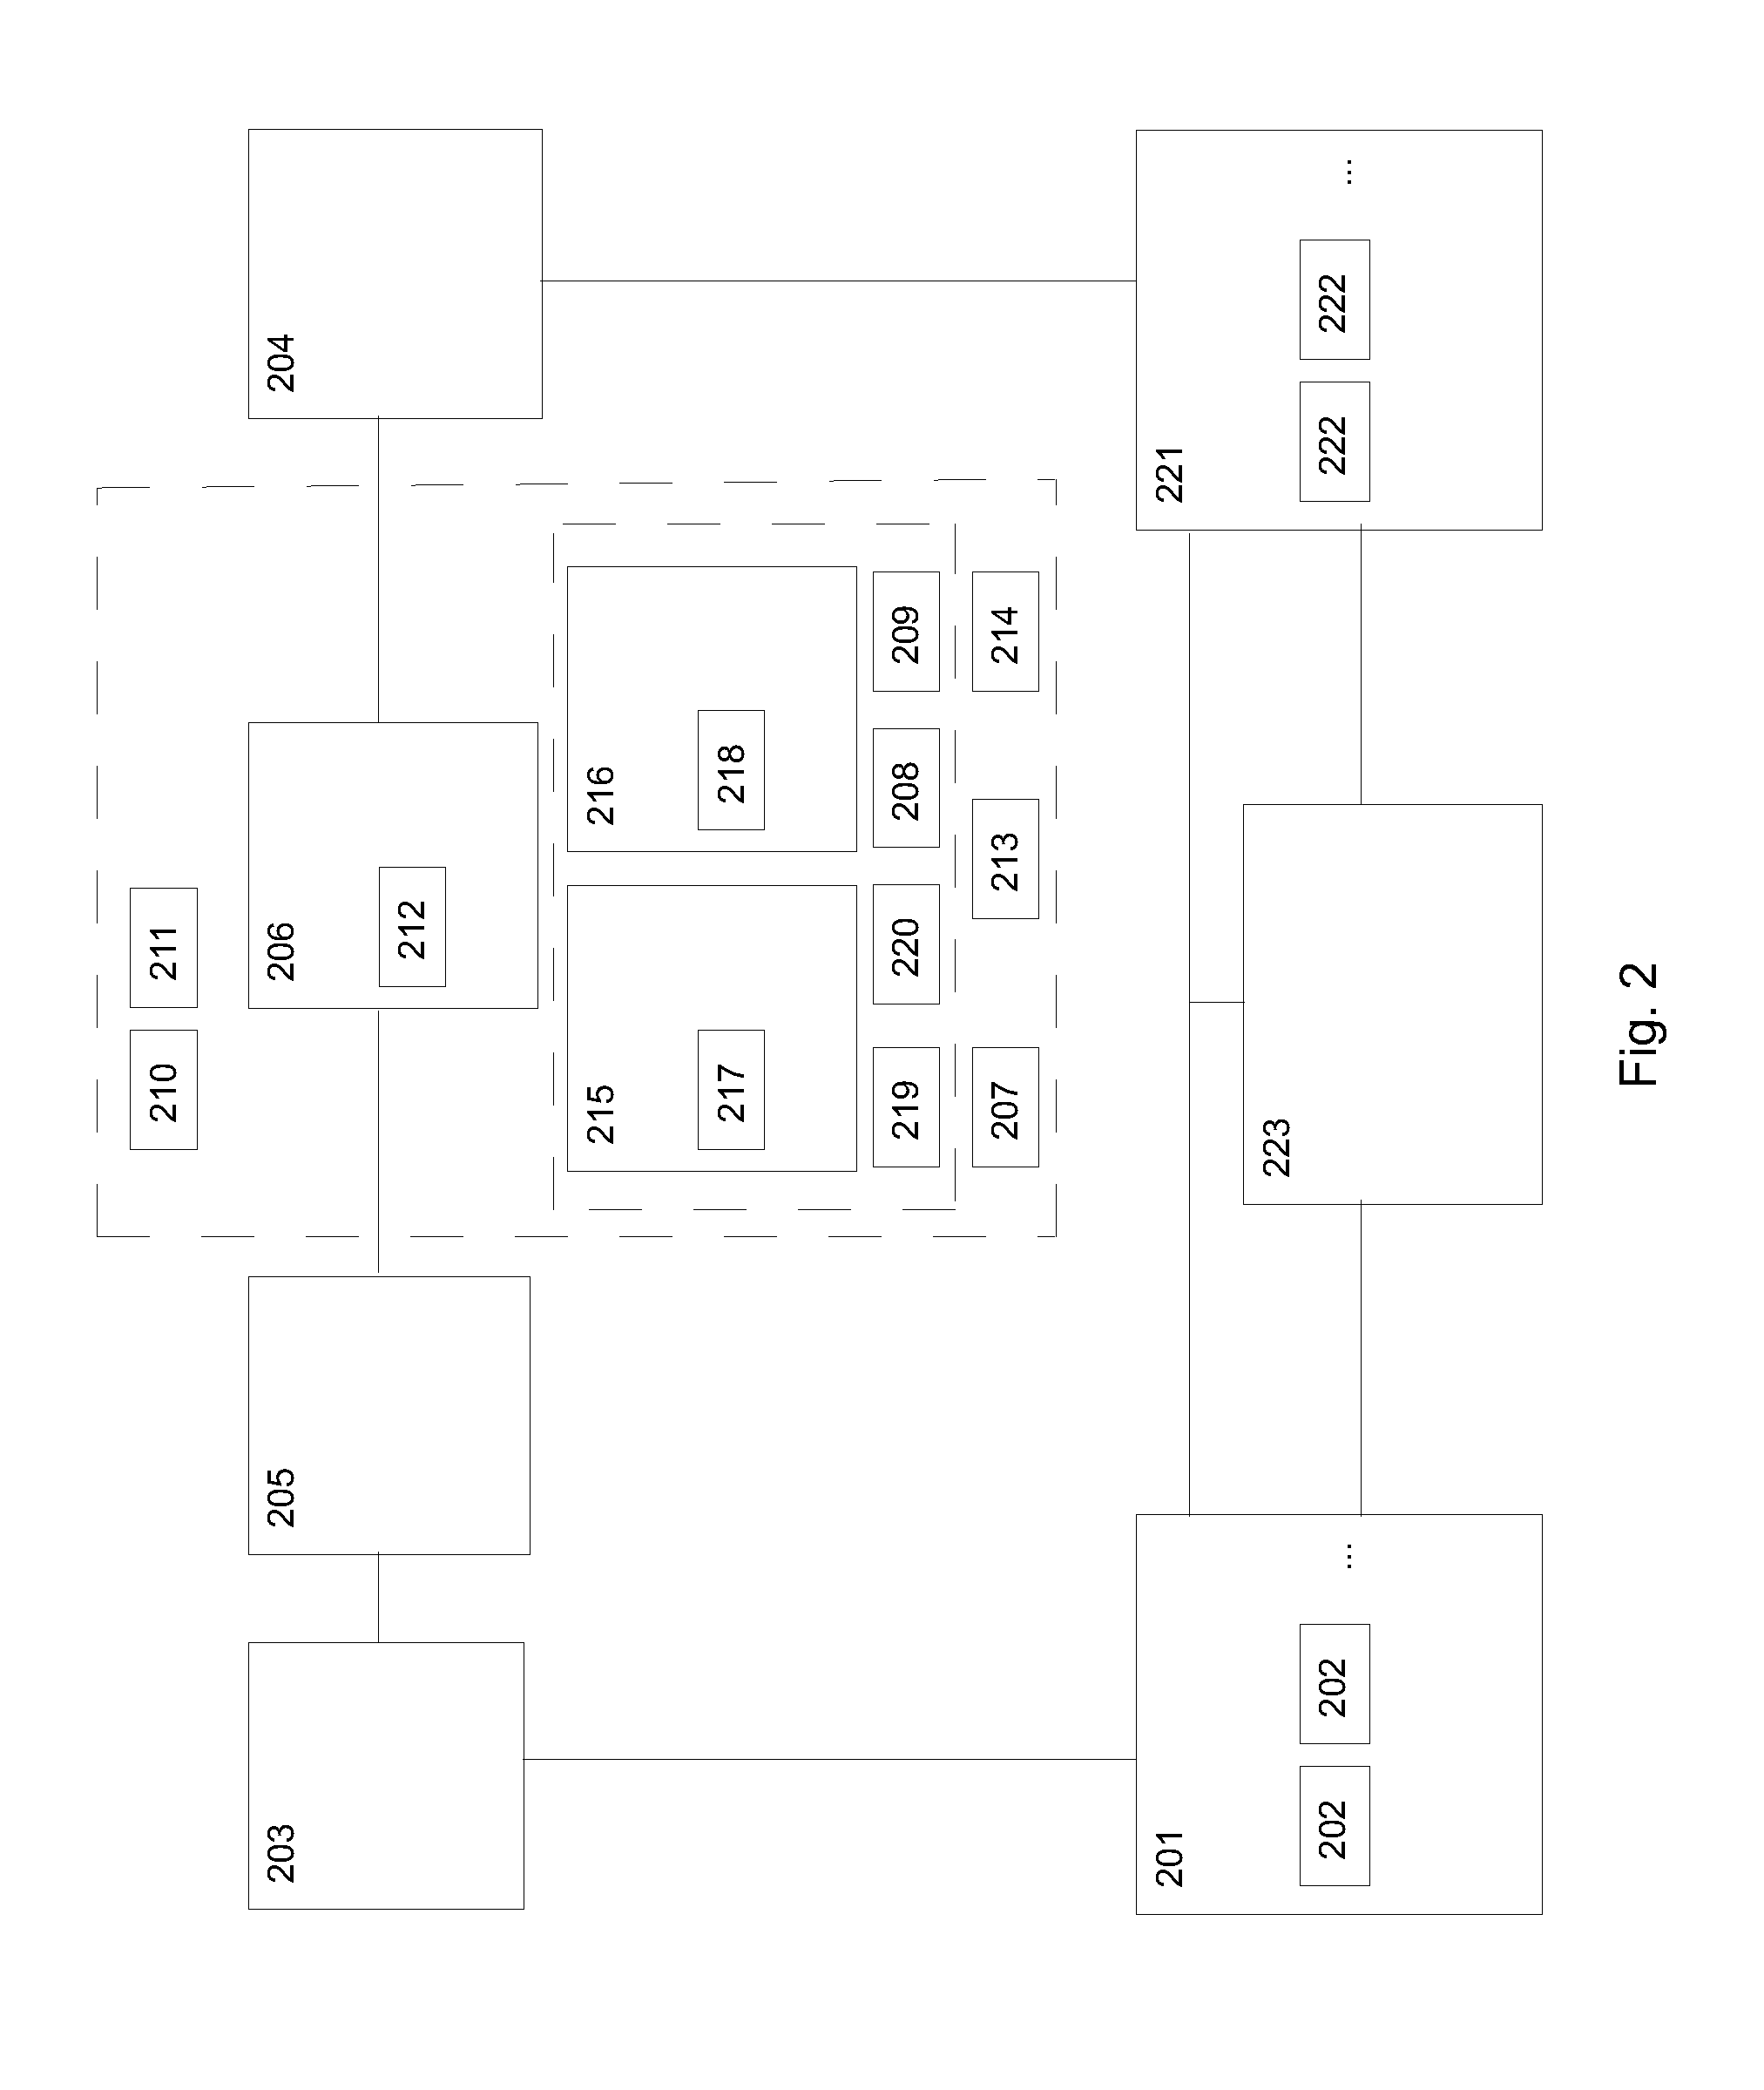 Methods and Apparatus for Increasing the Efficiency of Electronic Data Storage and Transmission